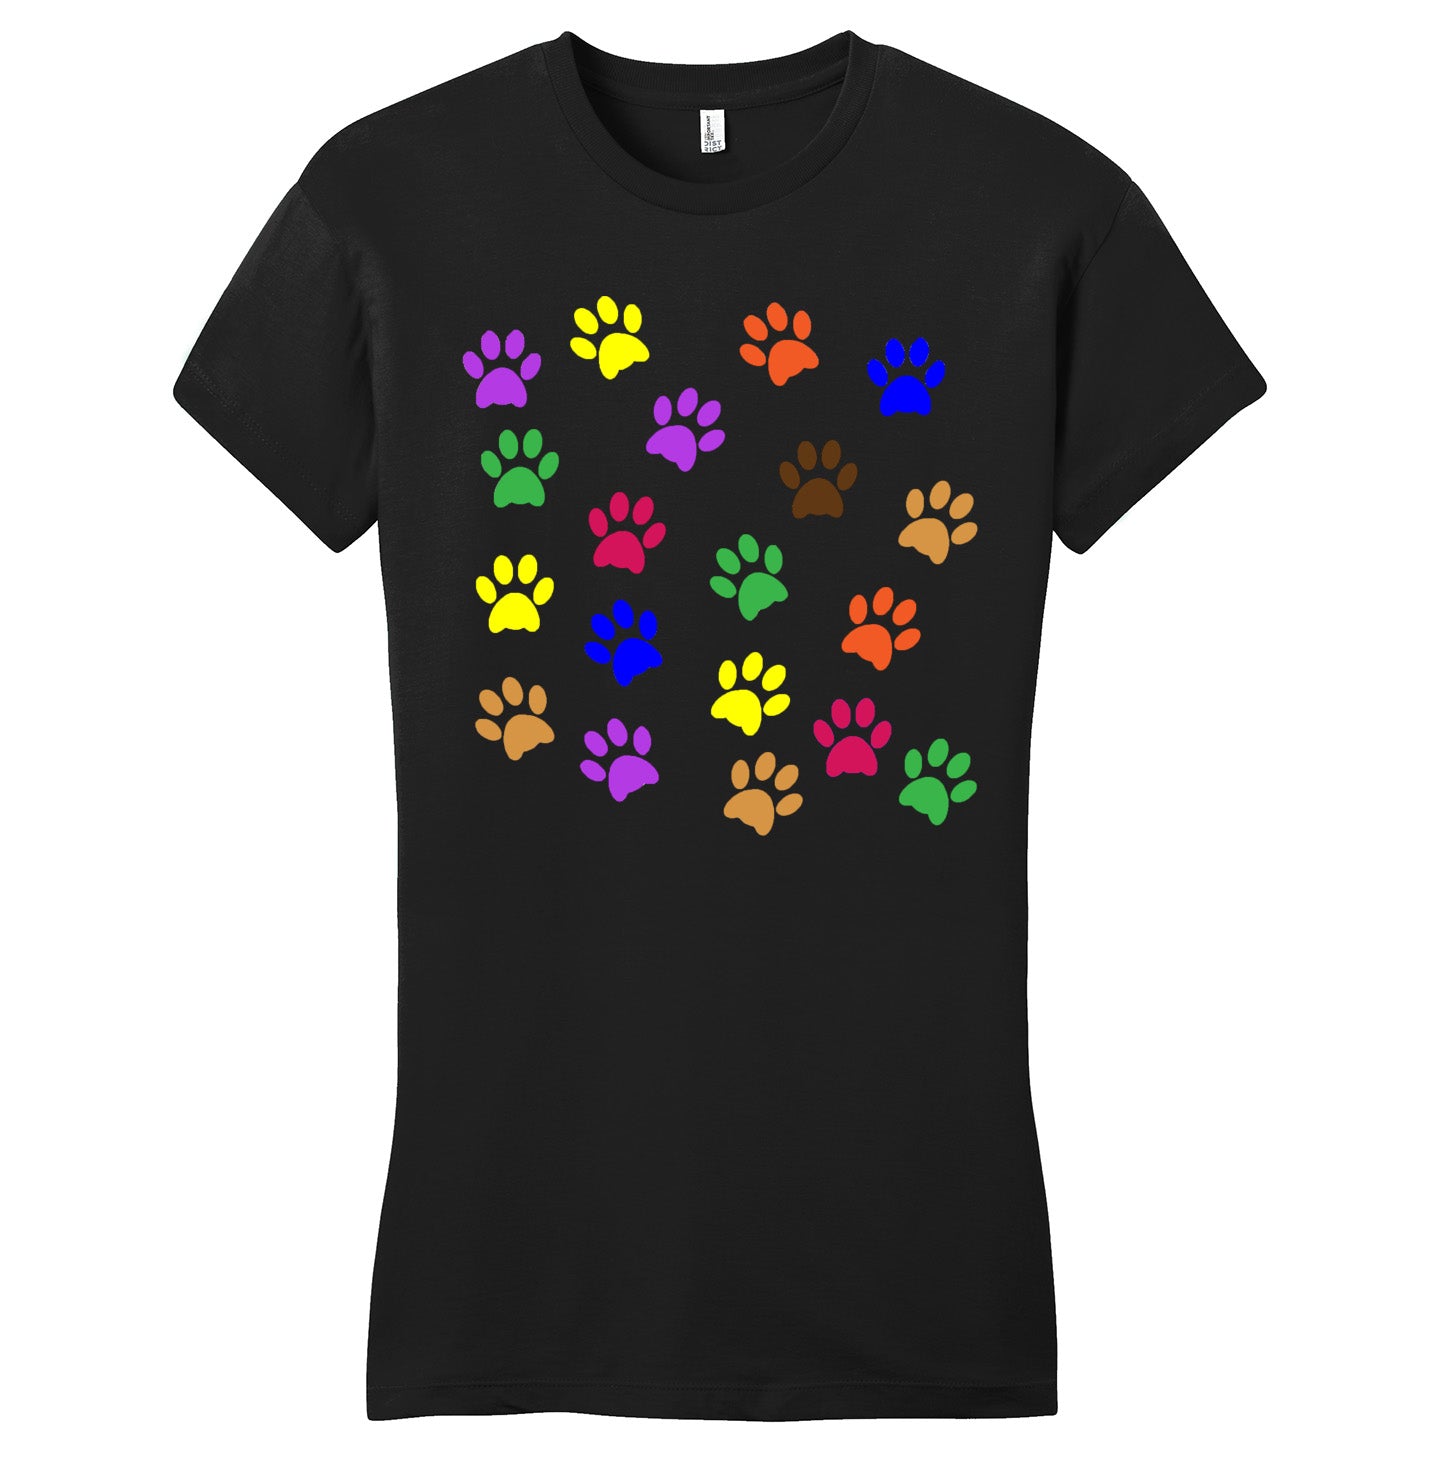 Colorful Paw Prints - Women's Fitted T-Shirt